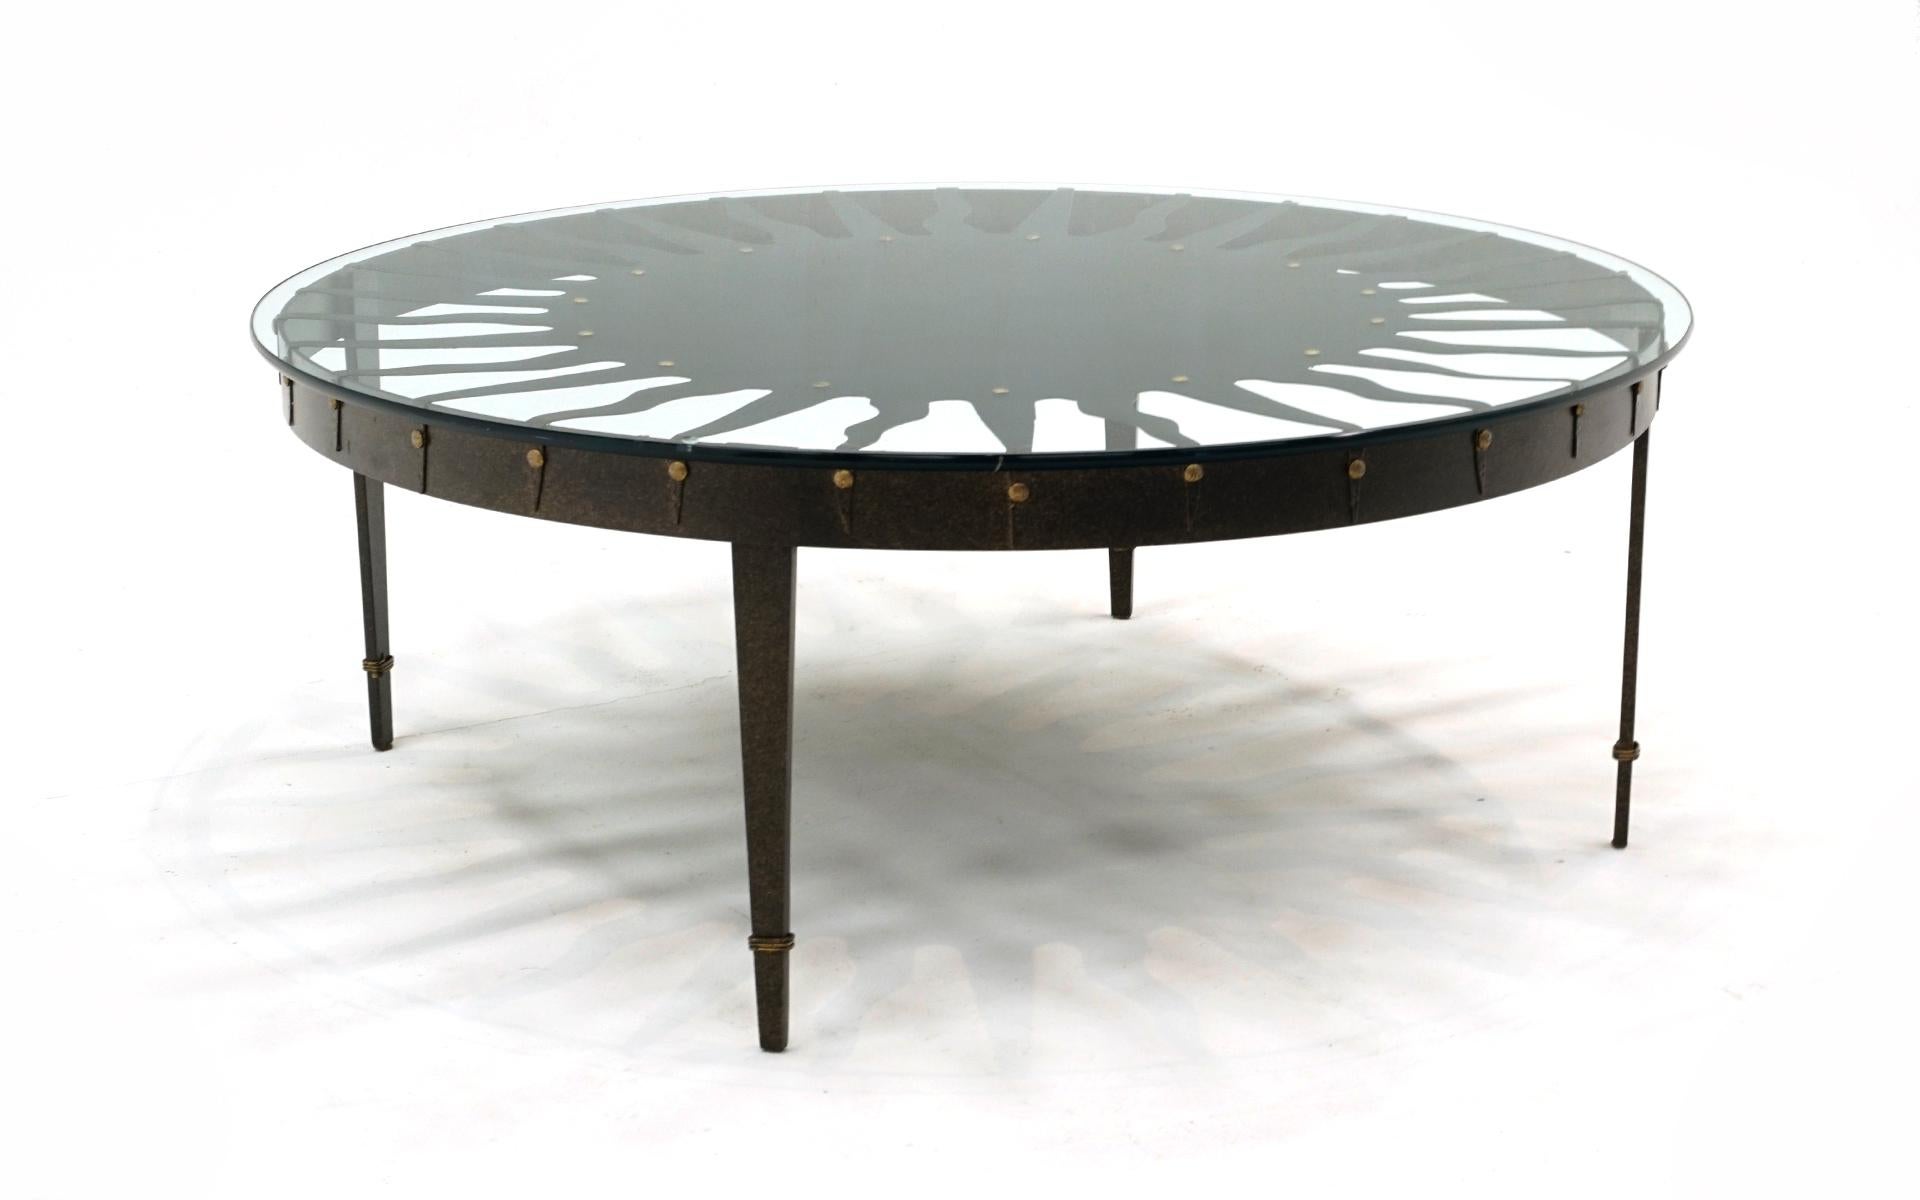 Iron and glass coffee table with sunburst design.  The base is black with subtle gold accents and in very good condition with few signs of use.  The original 3/8' glass top with rounded edges has not chips or significant scratches.  This piece is